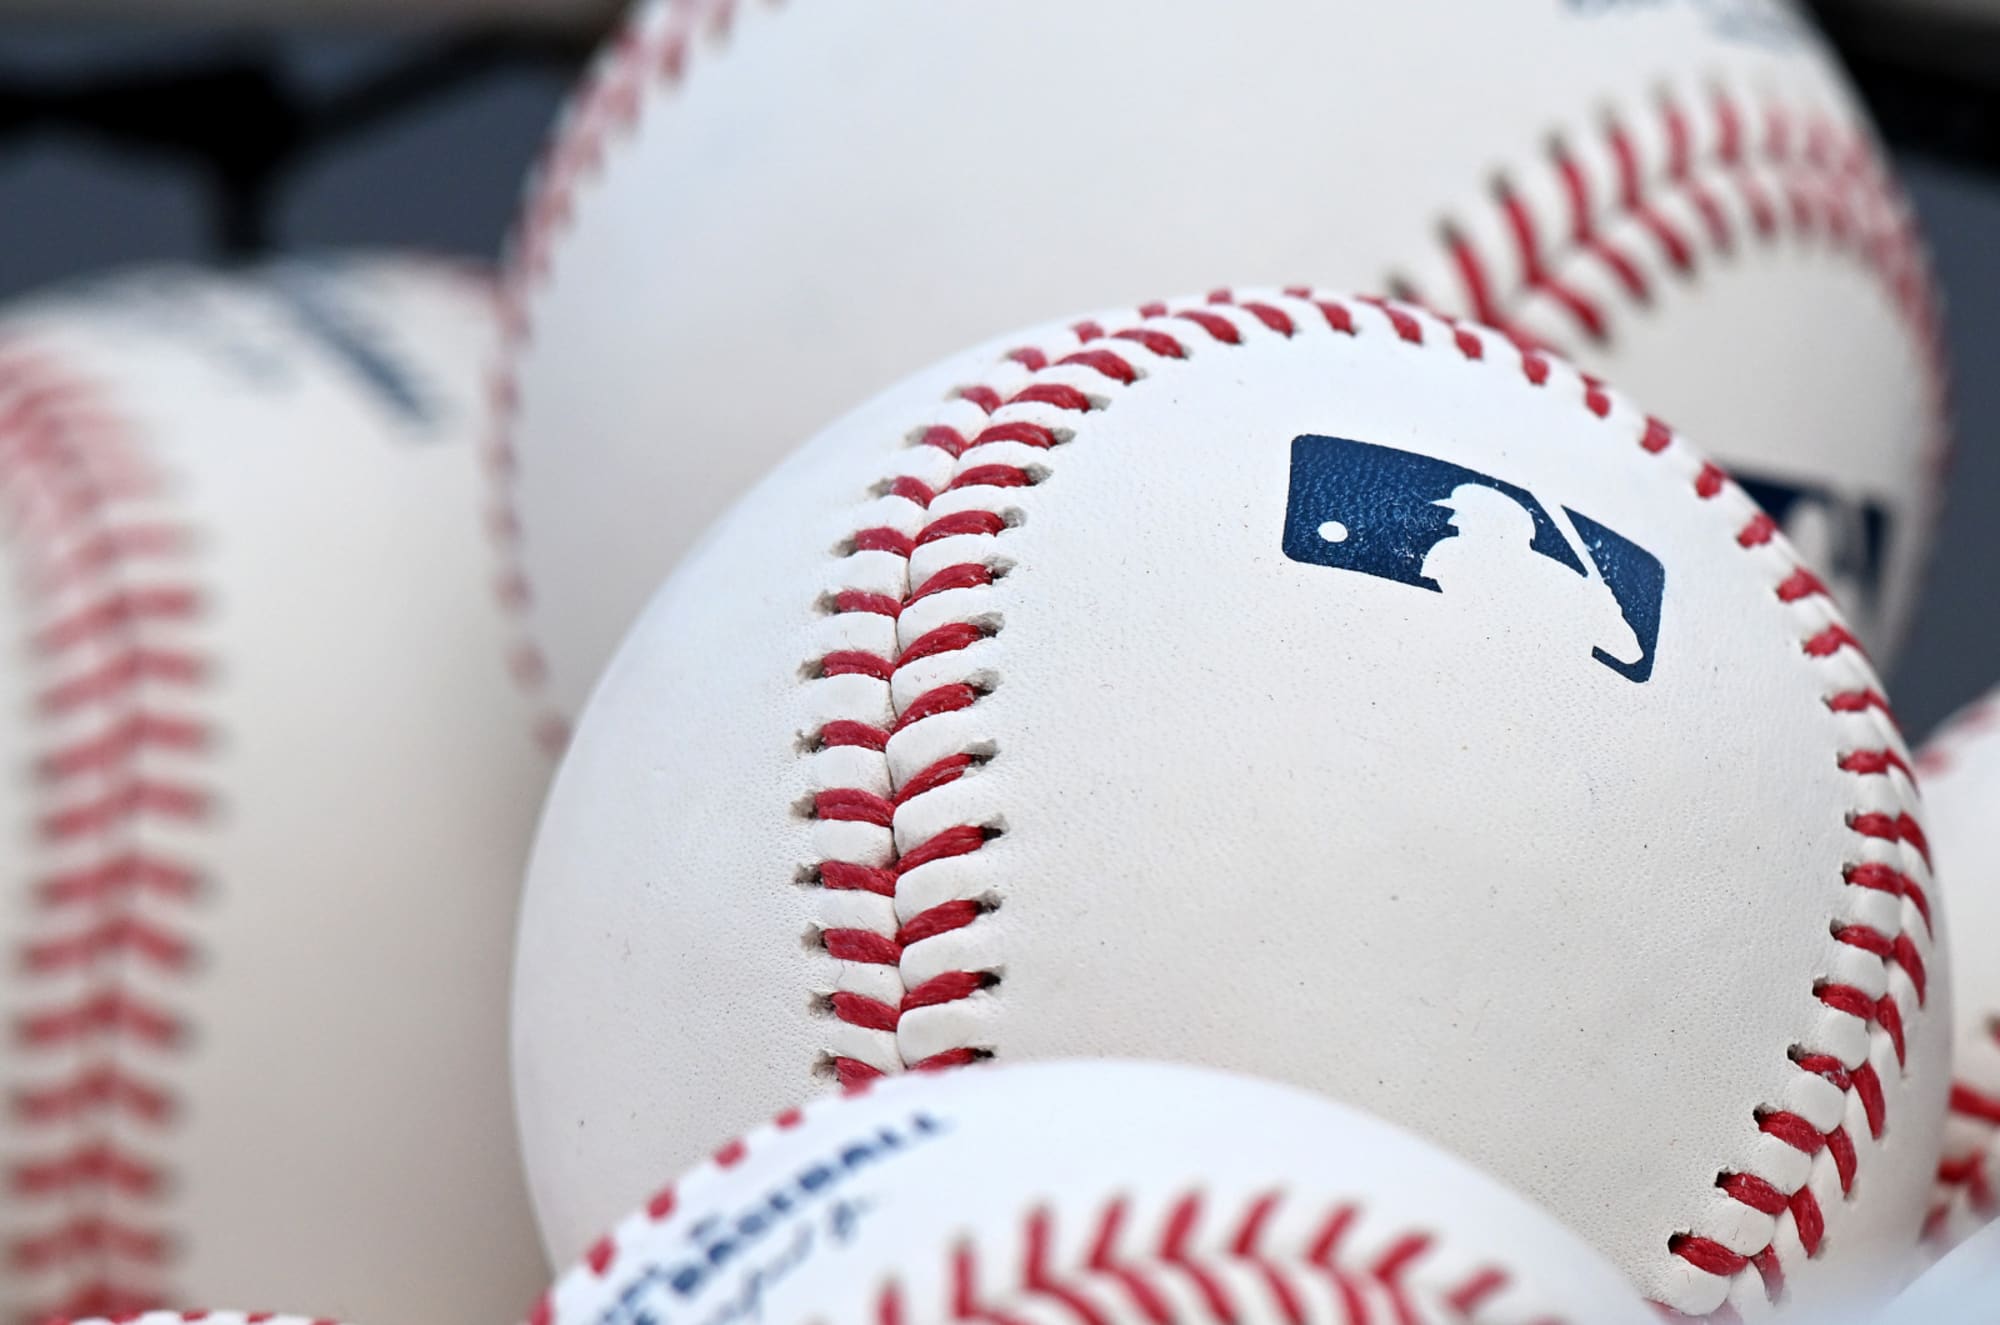 MLB streaming 2021 Watch baseballs pennant races live without cable  CNET